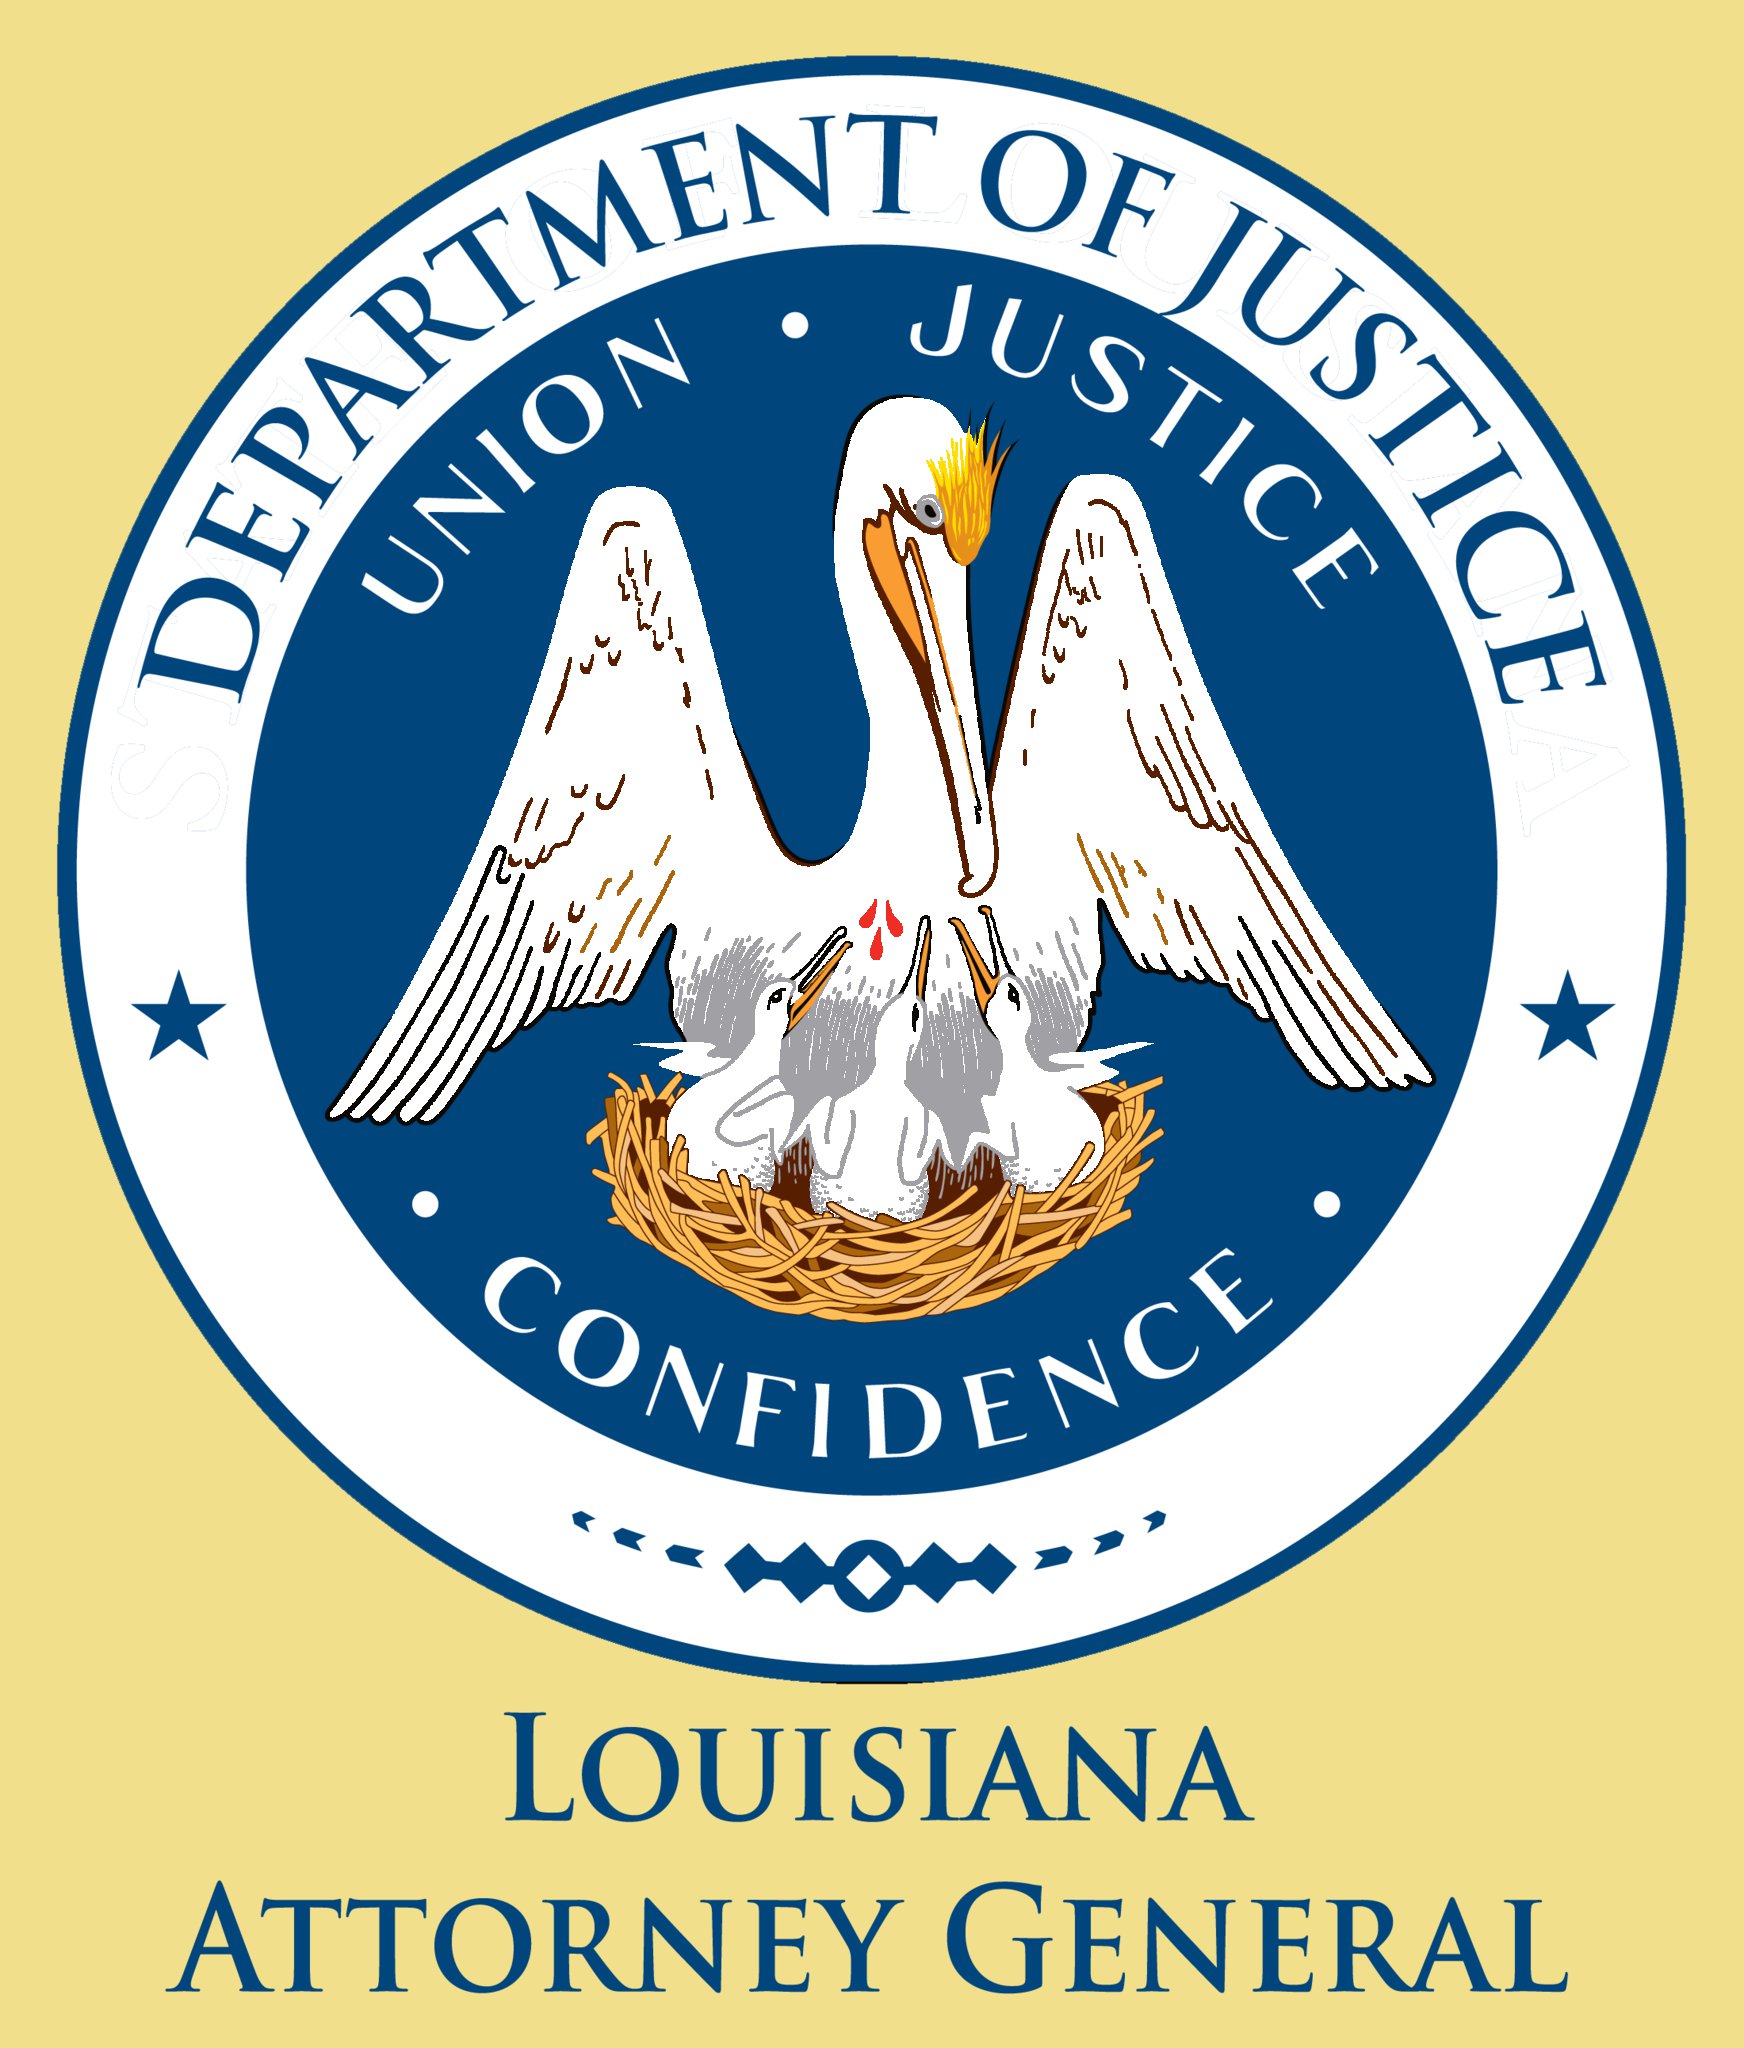 New Orleans Postal Worker Convicted On Tax Fraud Charges